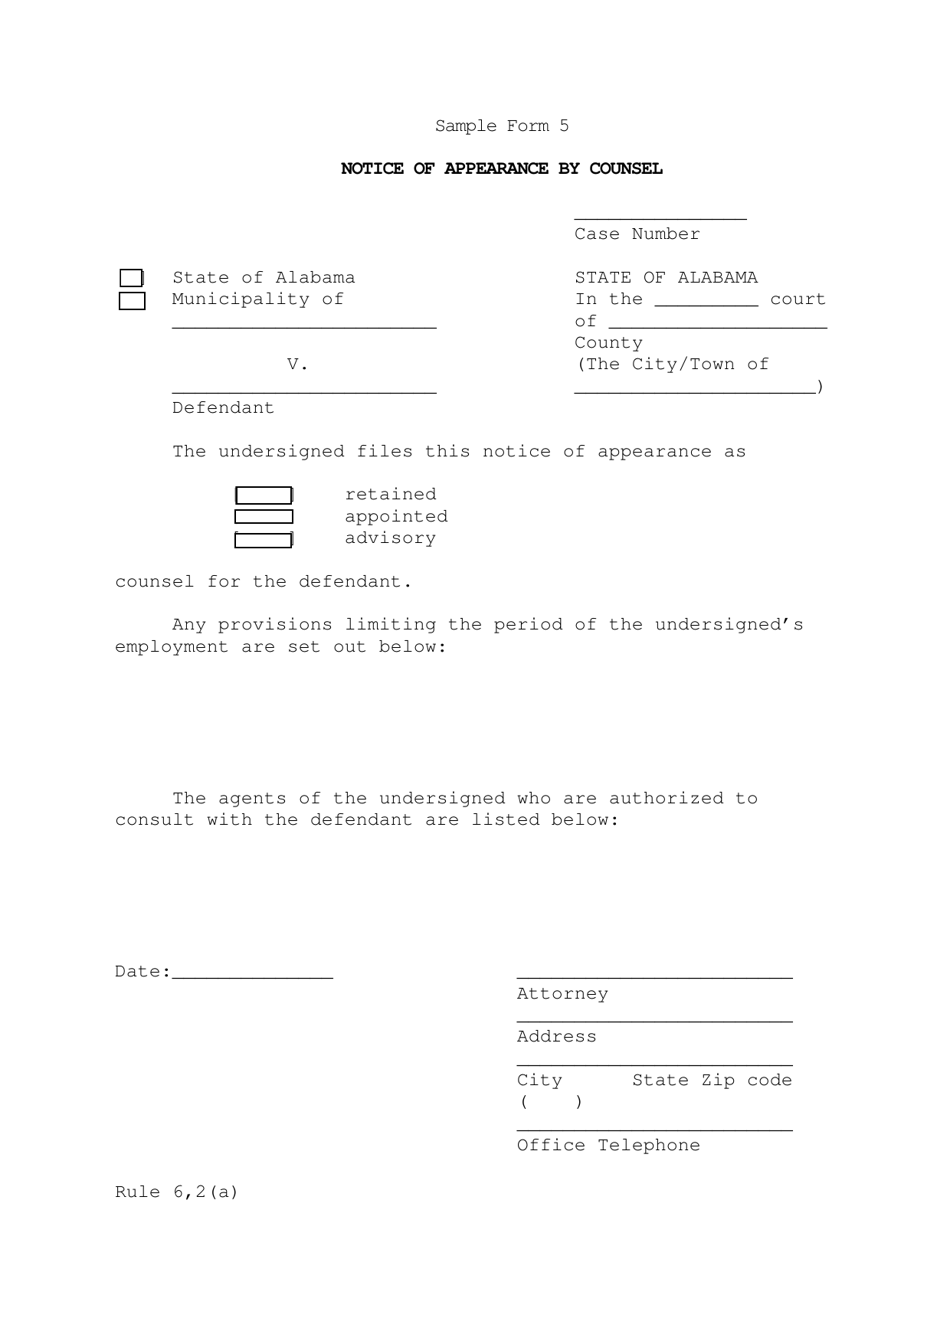 Sample Form 5 Notice of Appearance by Counsel - Alabama, Page 1